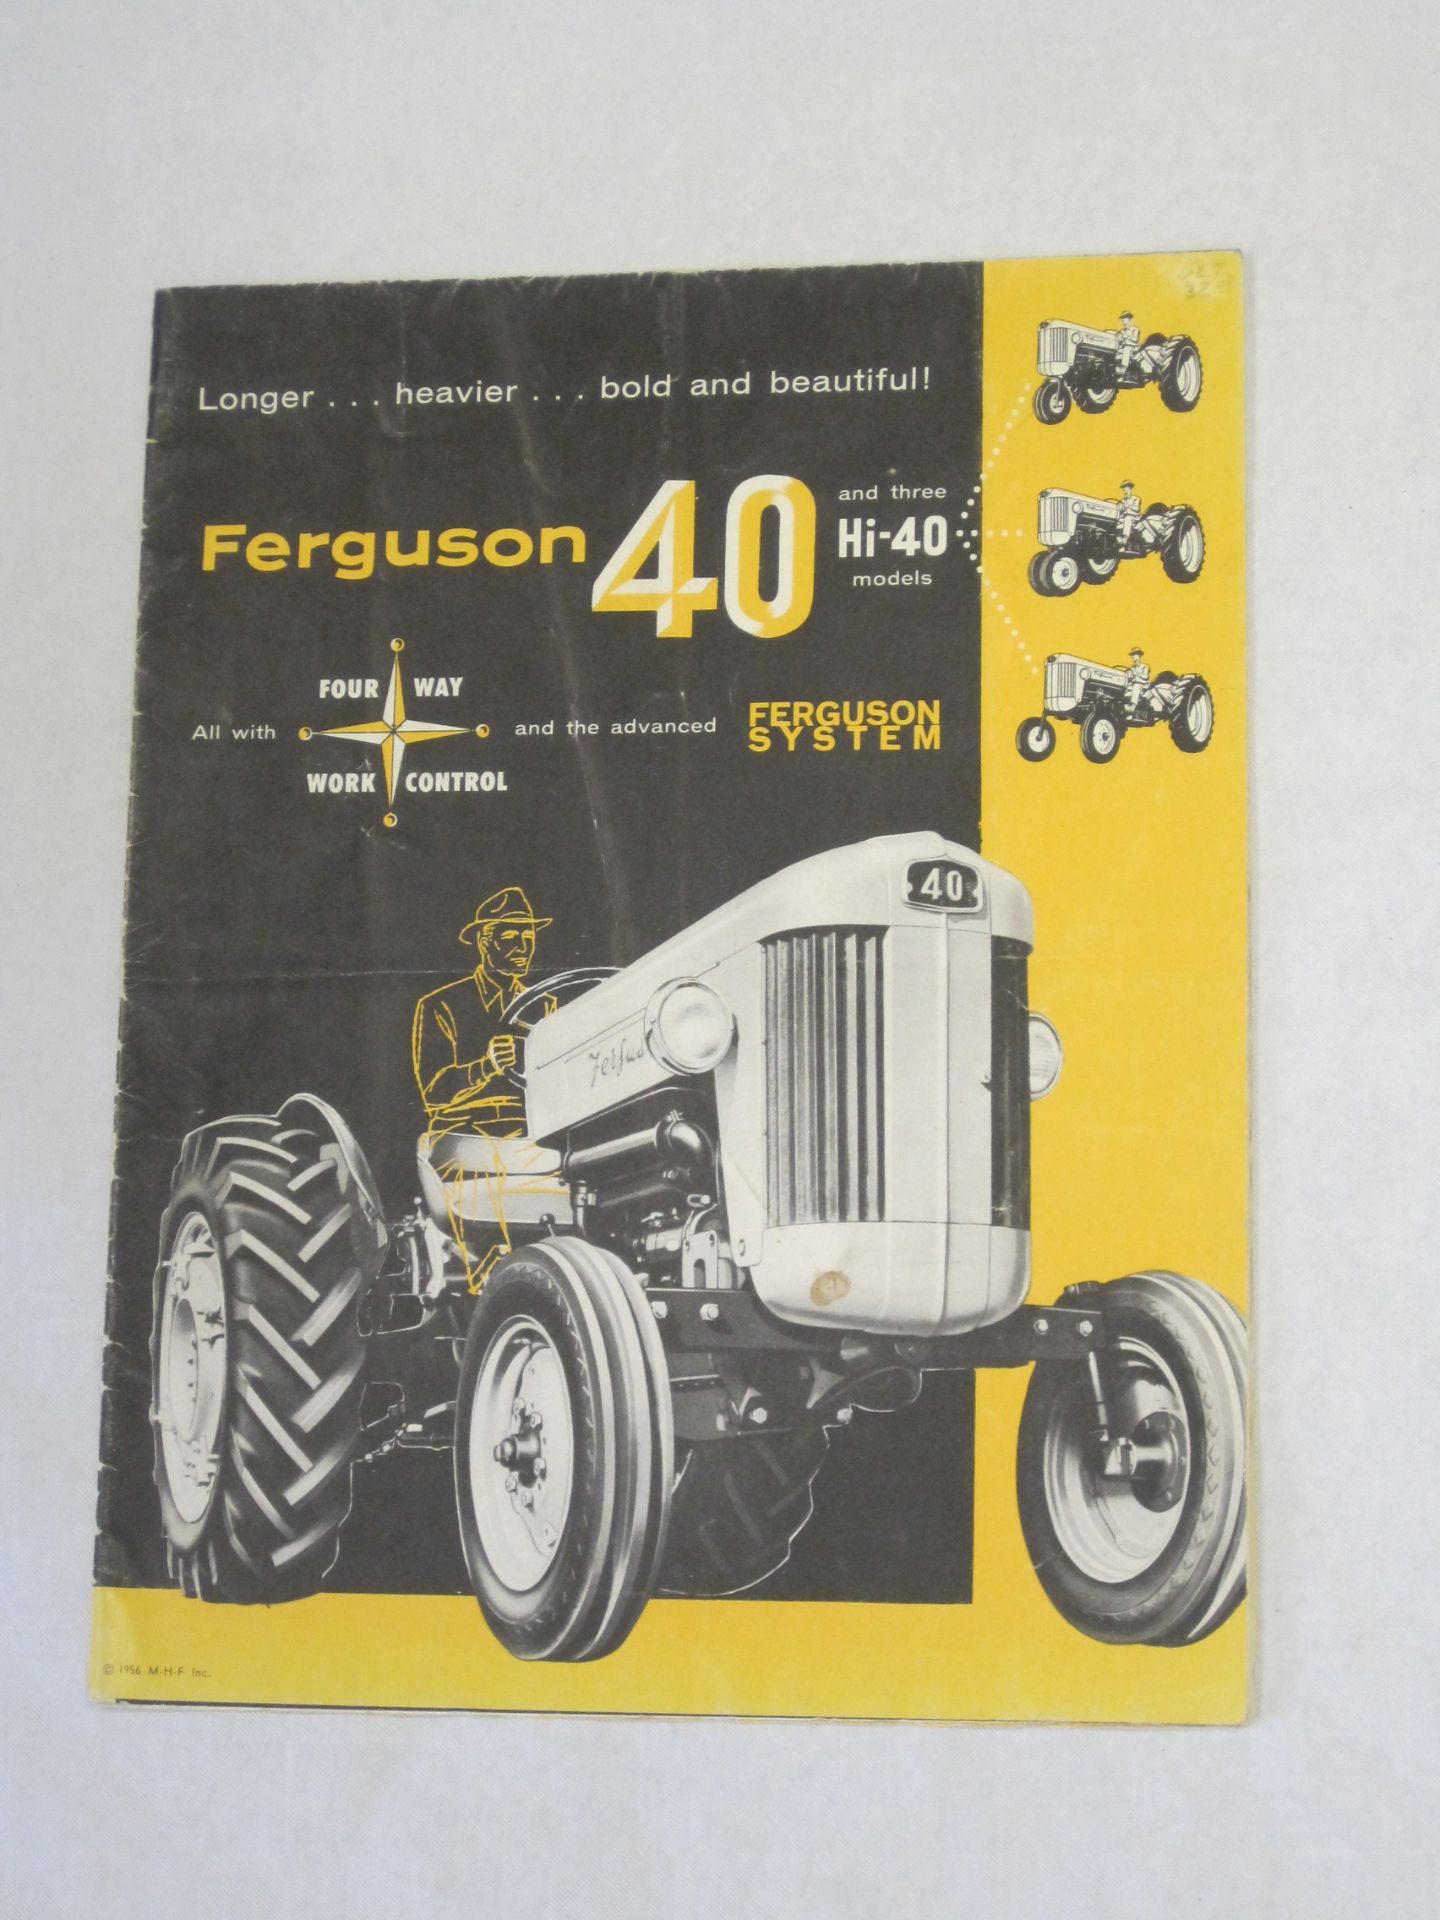 Ferguson 40 a double sided fold out brochure/poster, 1956